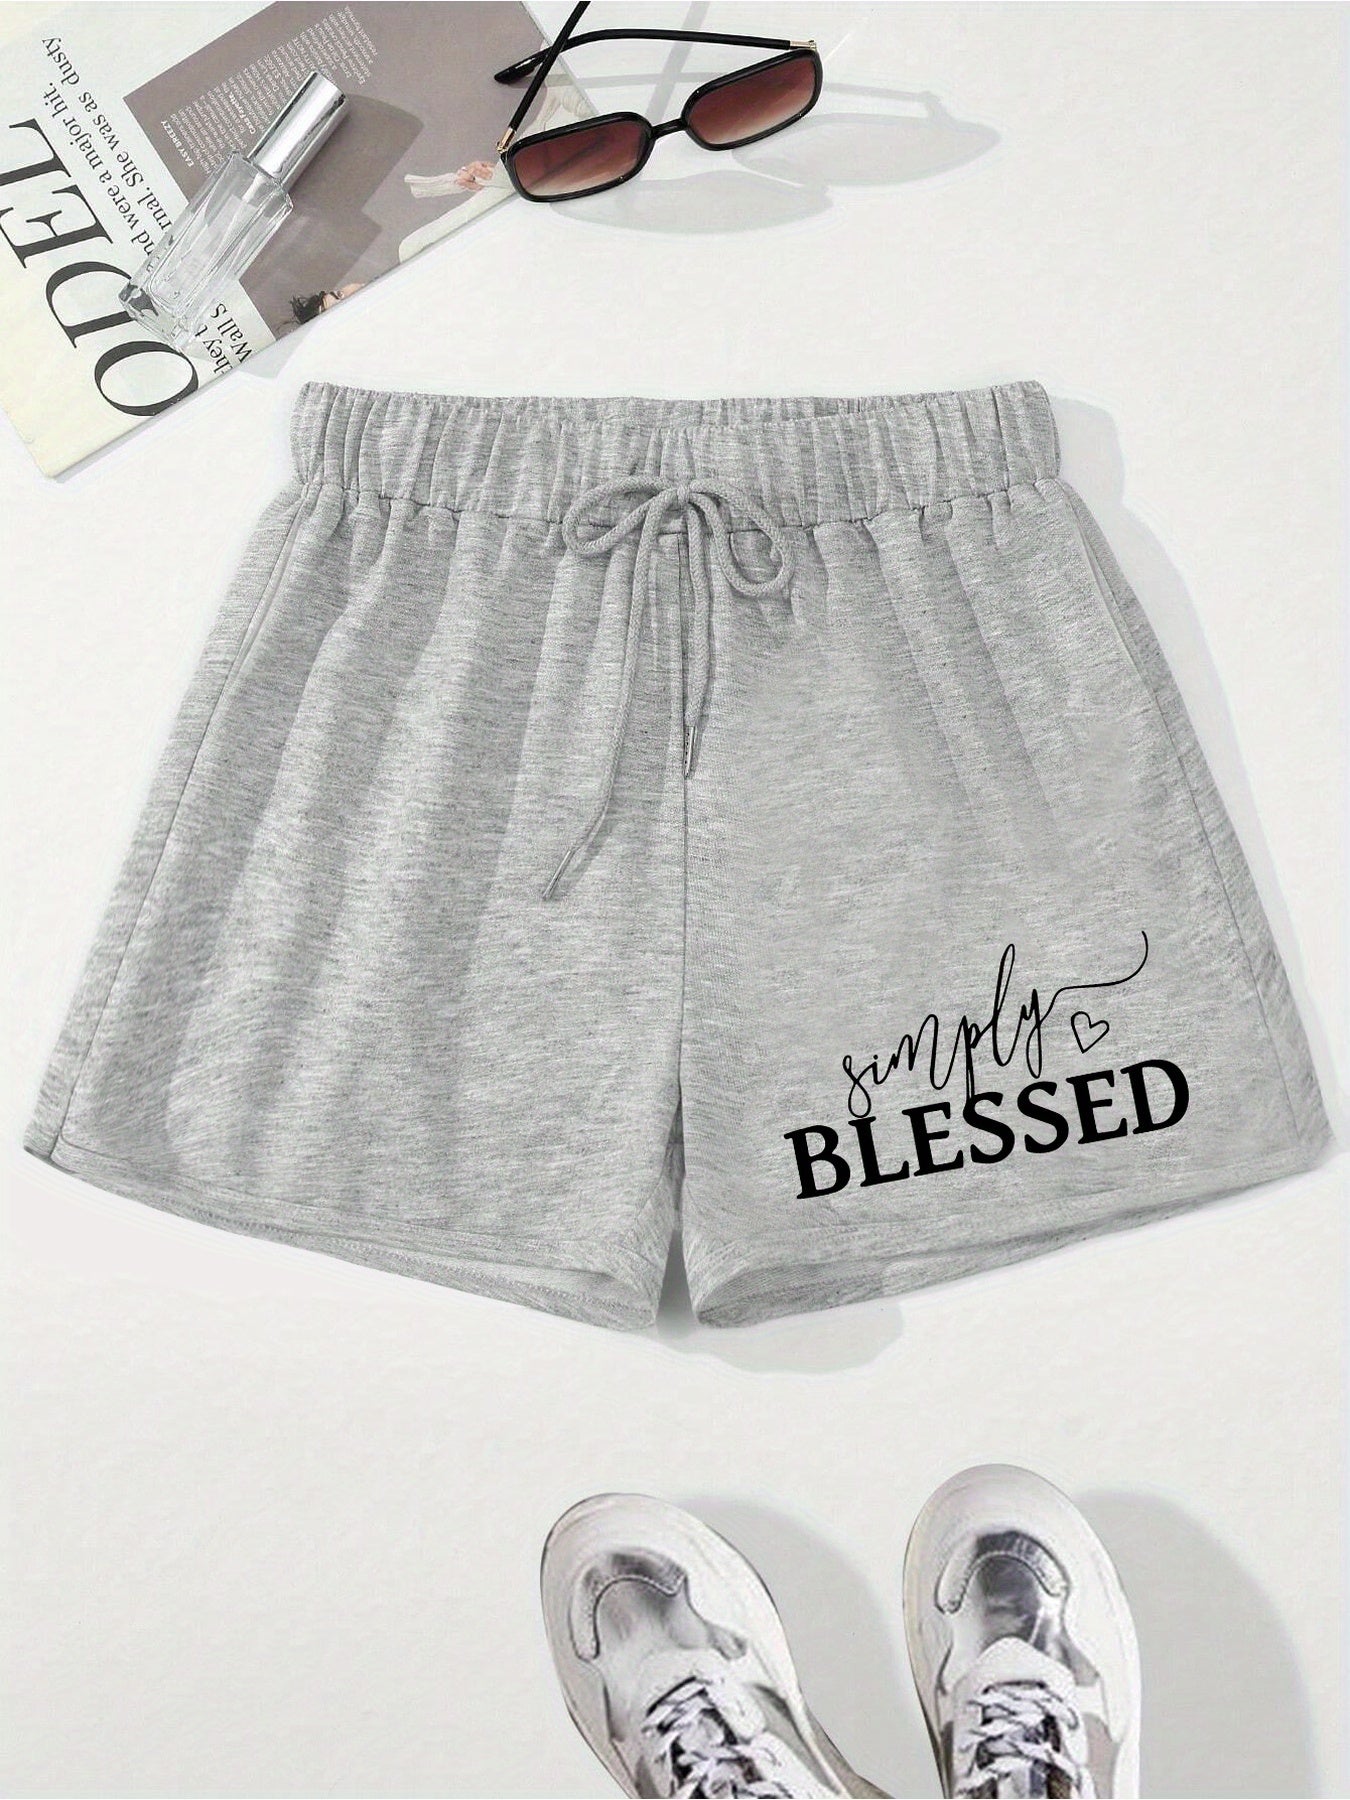 Simply Blessed Women's Christian Shorts claimedbygoddesigns